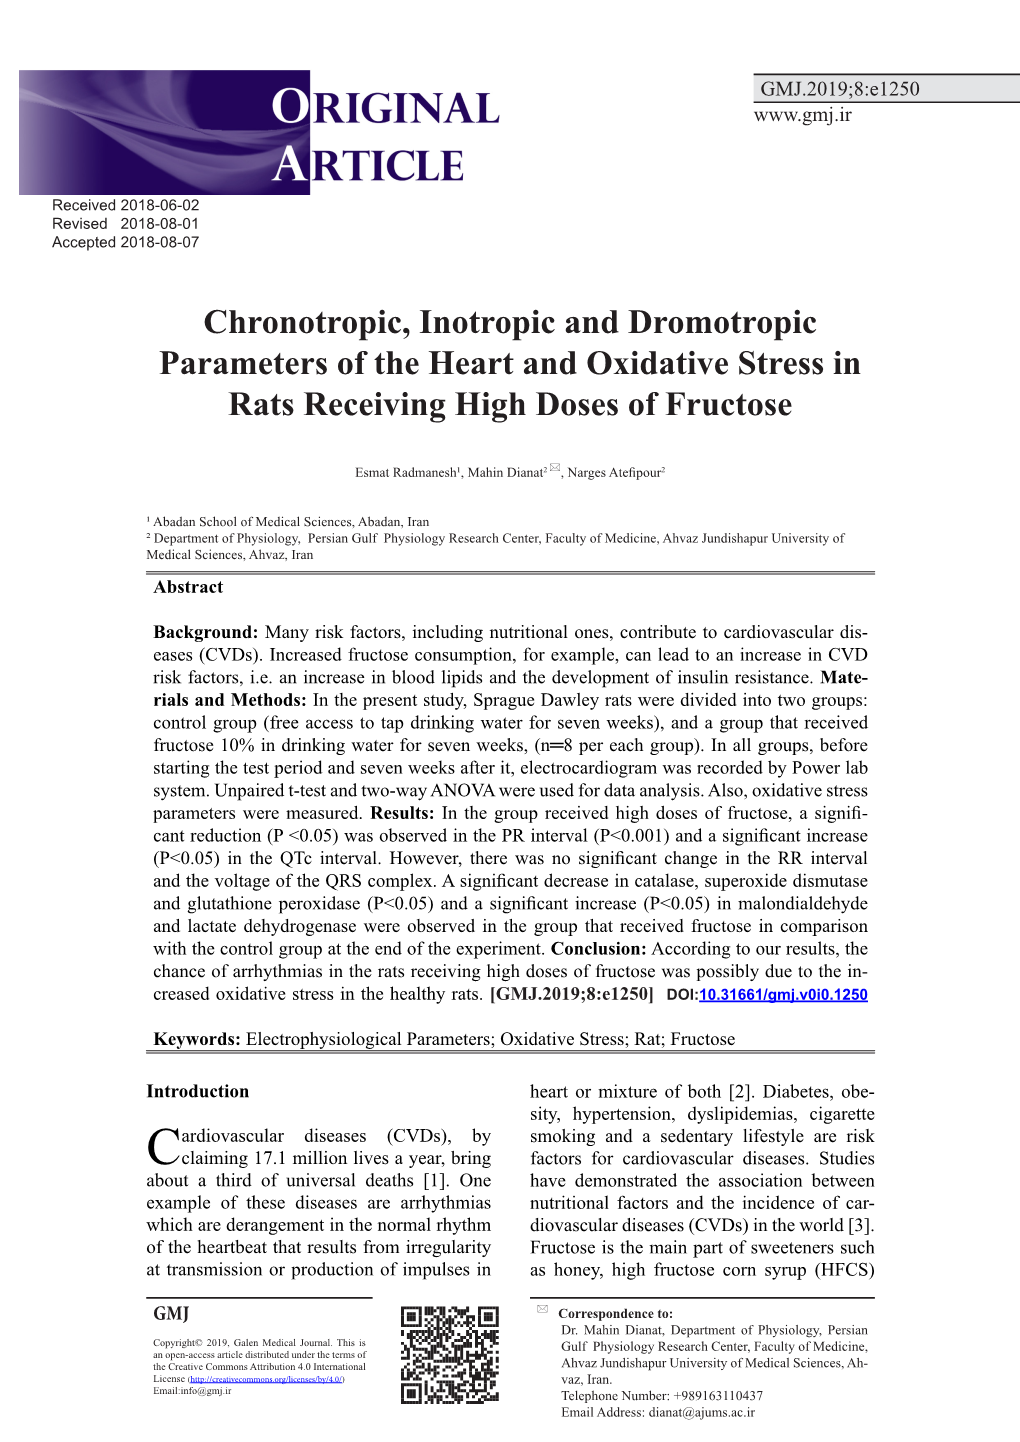 Chronotropic, Inotropic and Dromotropic Parameters of the Heart and Oxidative Stress in Rats Receiving High Doses of Fructose